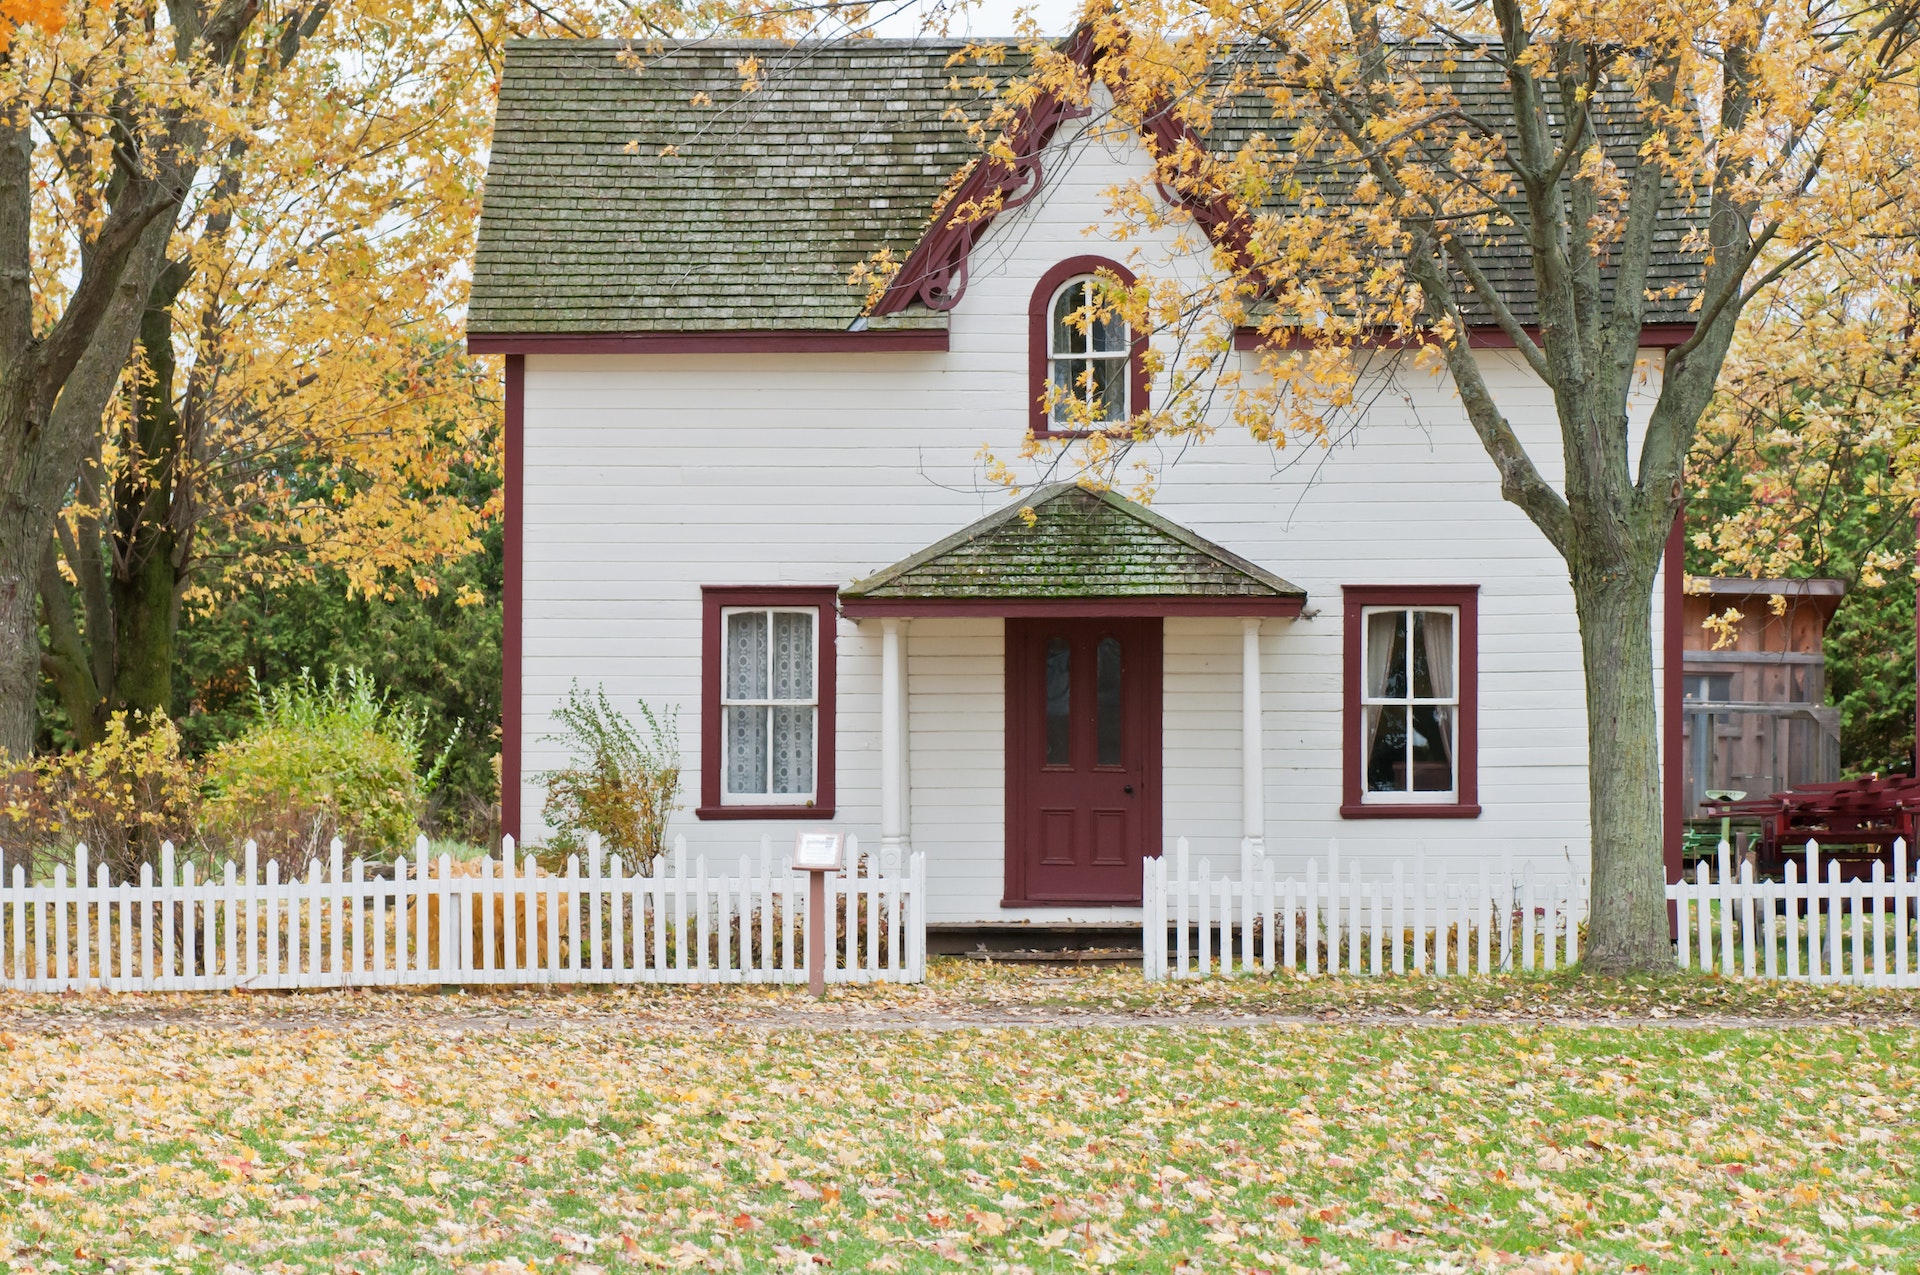 A small two story cottage style home sits between several trees. It is fall, and the leaves of the trees are yellow. The lawn has a light coating of yellow leaves.